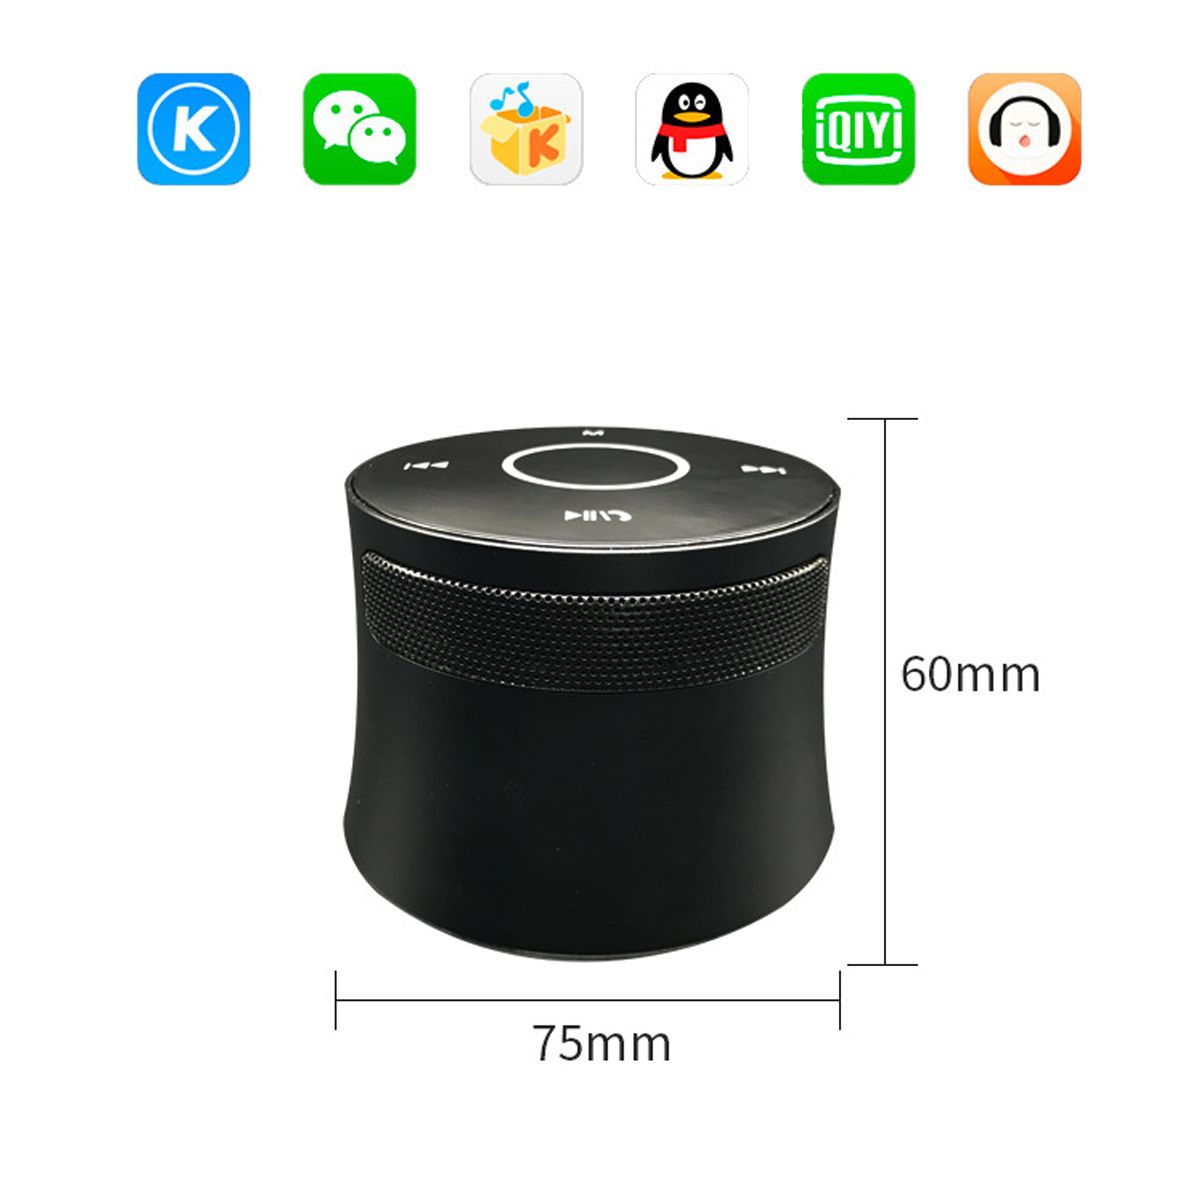 Bakeey-600mAh-TF-Card-Wireless-bluetooth-Speaker-AUX-Playback-HIFI-Sound-Player-Support-A2DP-AVRCP-H-1642267